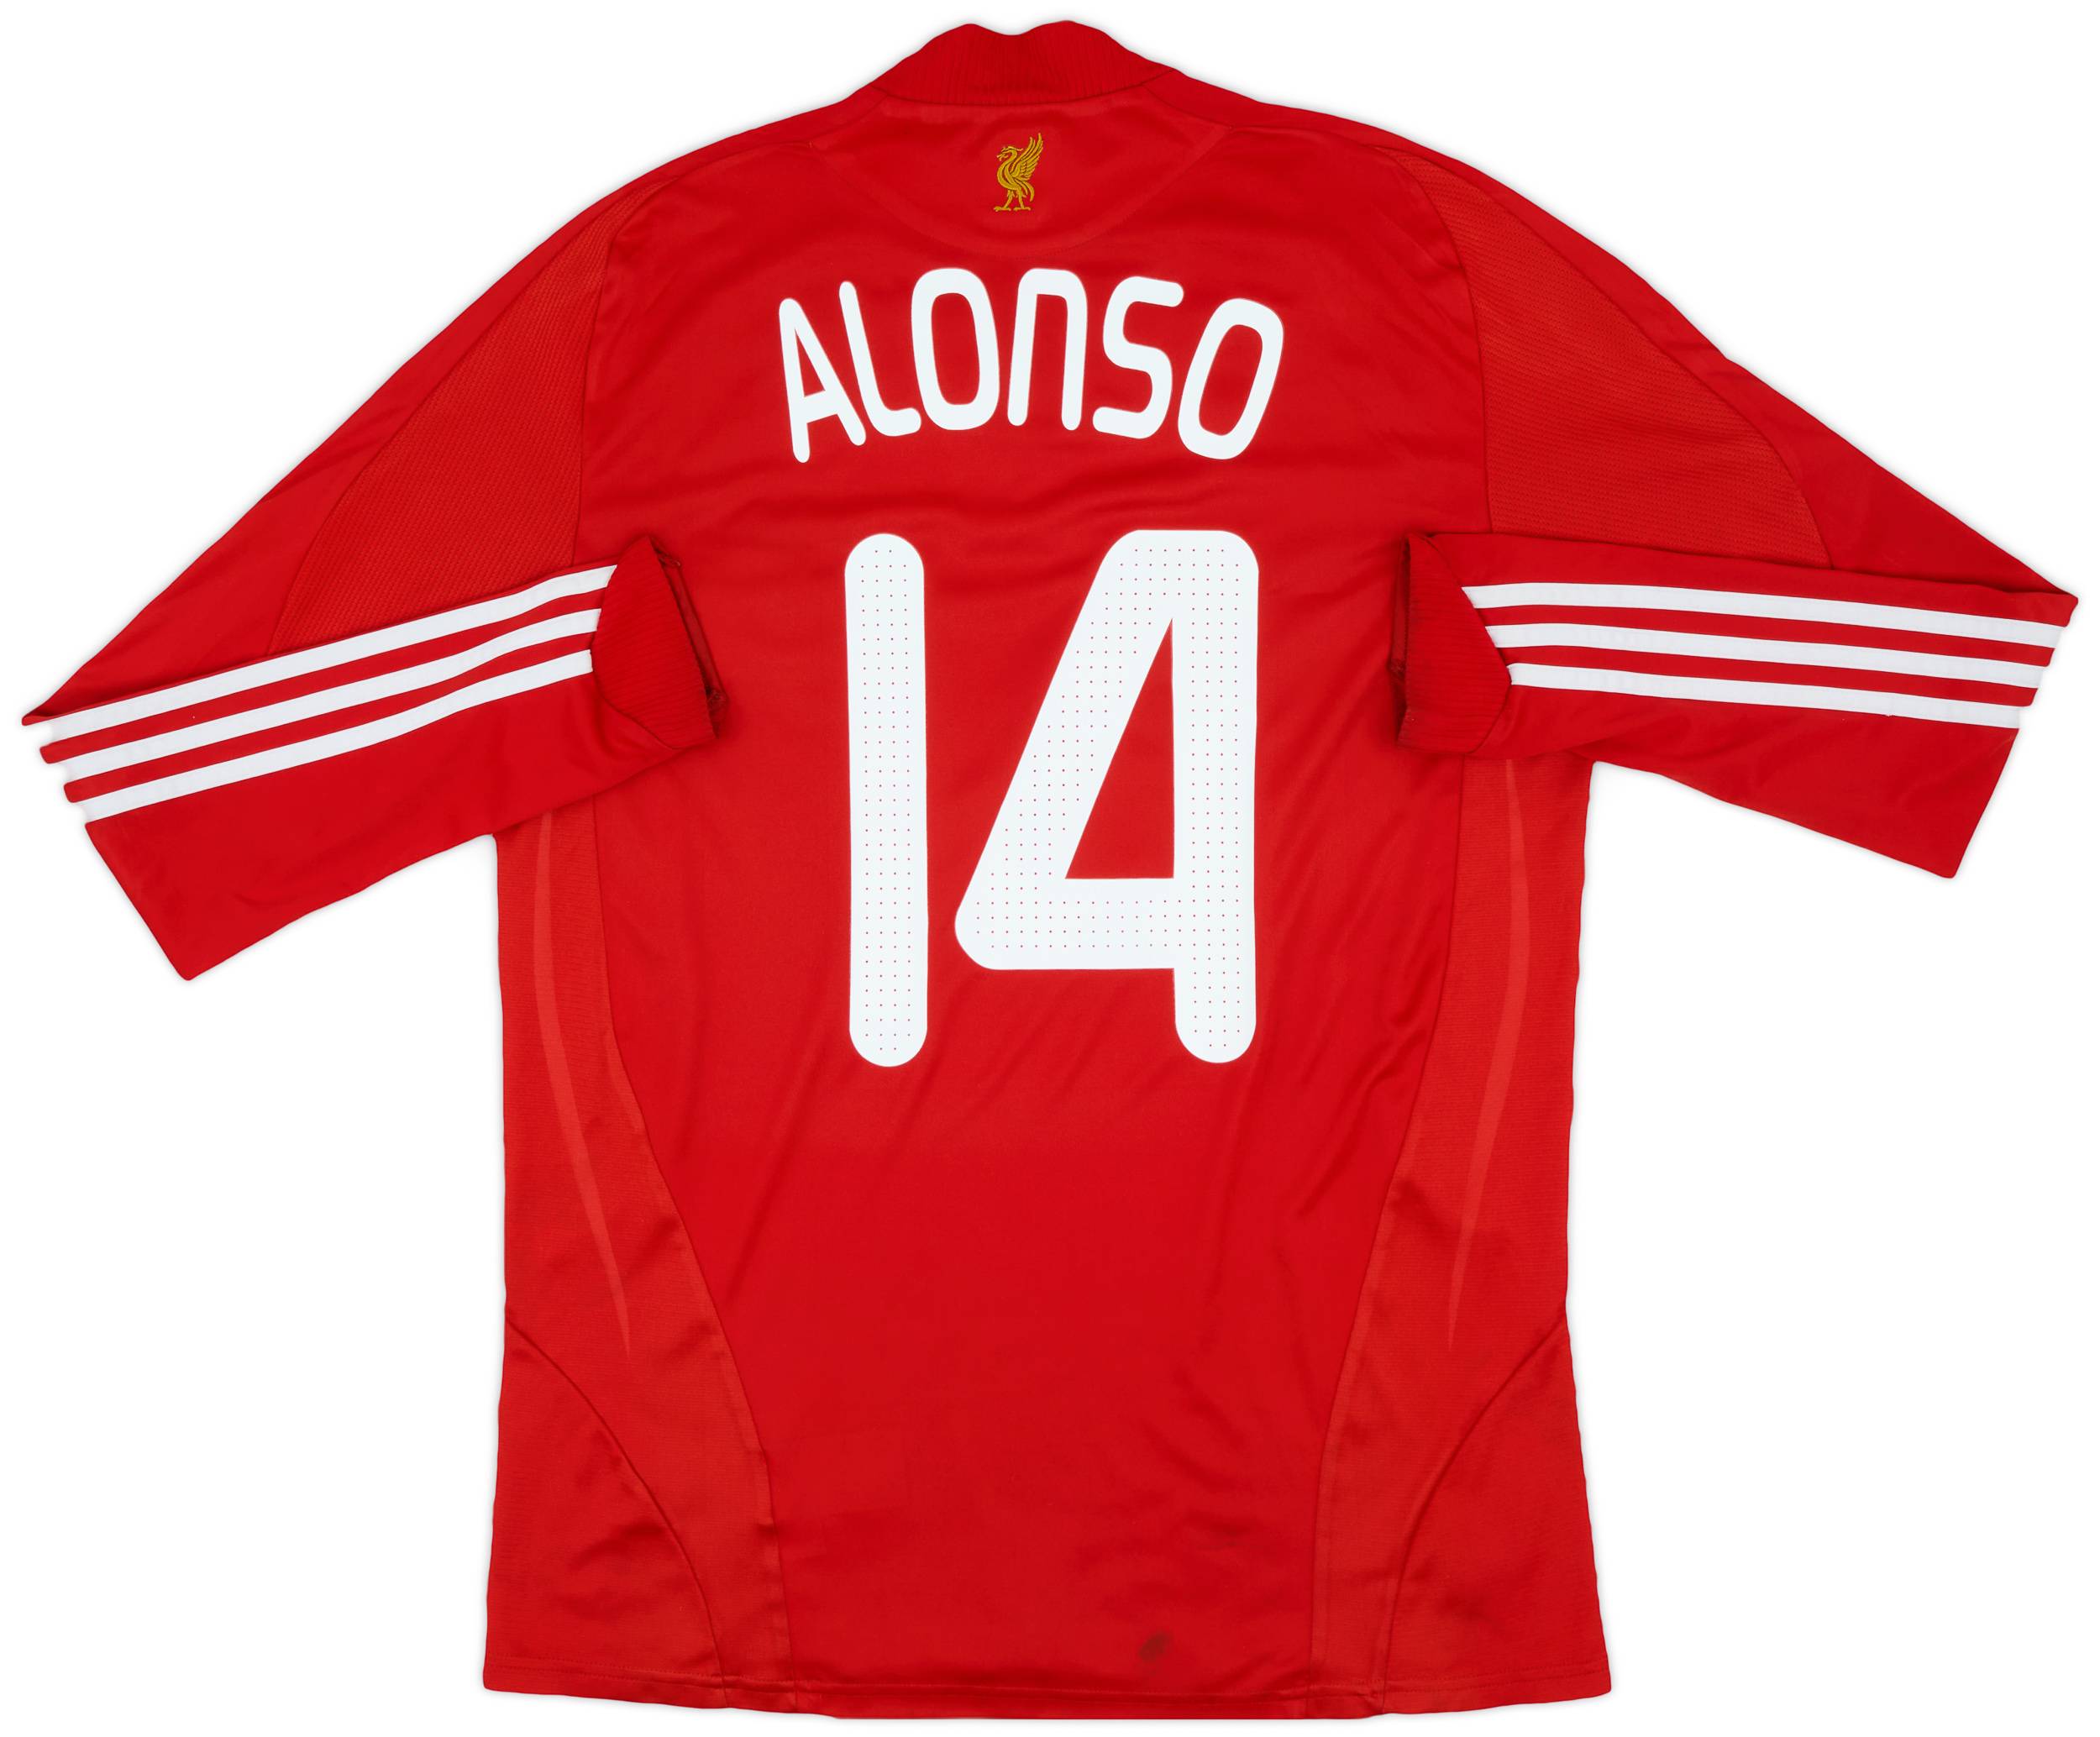 2008-10 Liverpool Home L/S Shirt Alonso #14 - 7/10 - (M)